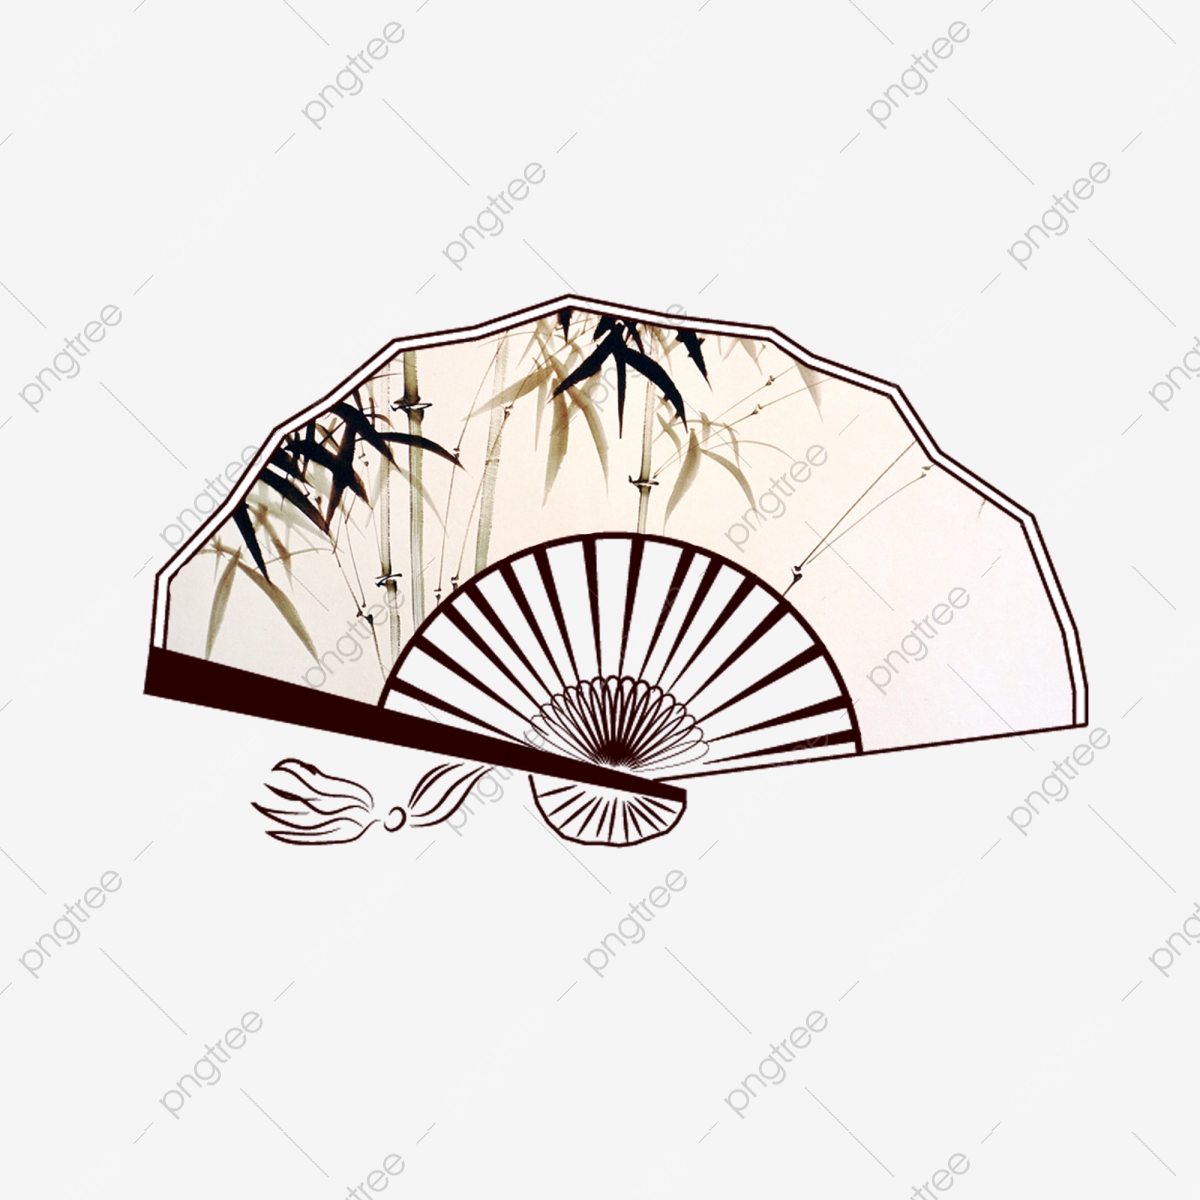 Fan clipart tradition chinese, Fan tradition chinese Transparent FREE ...